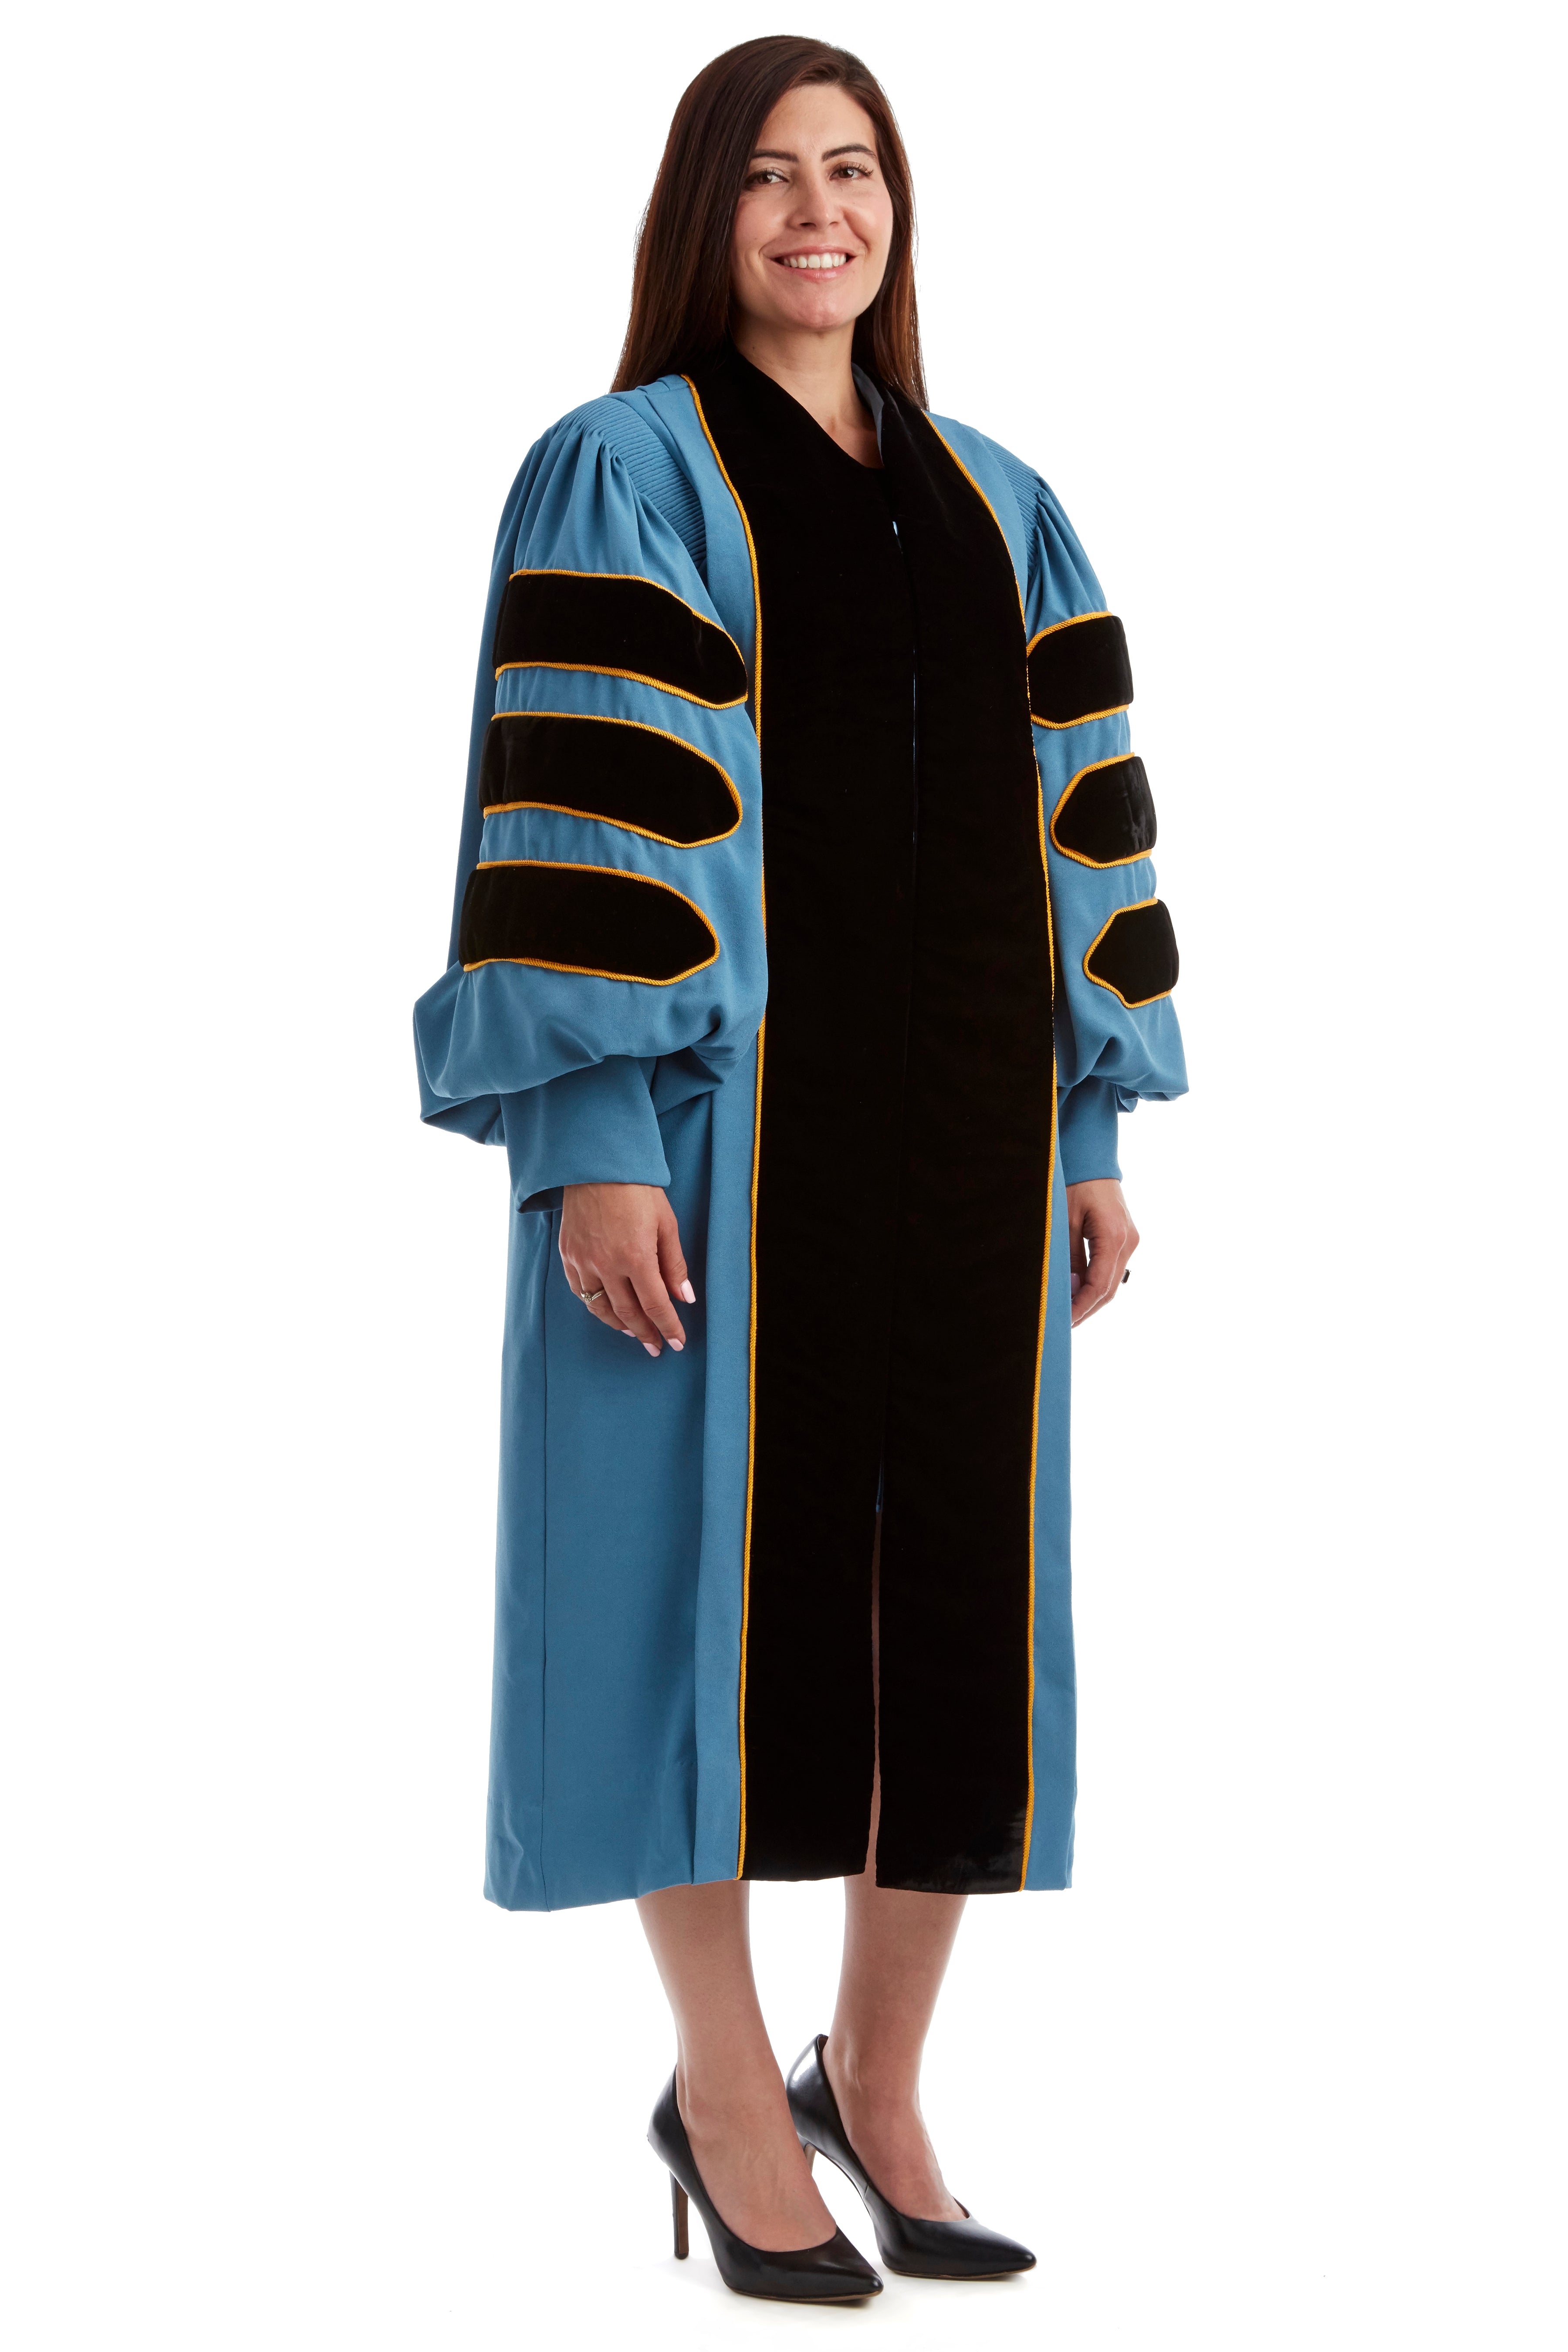 University of Michigan Doctoral Gown